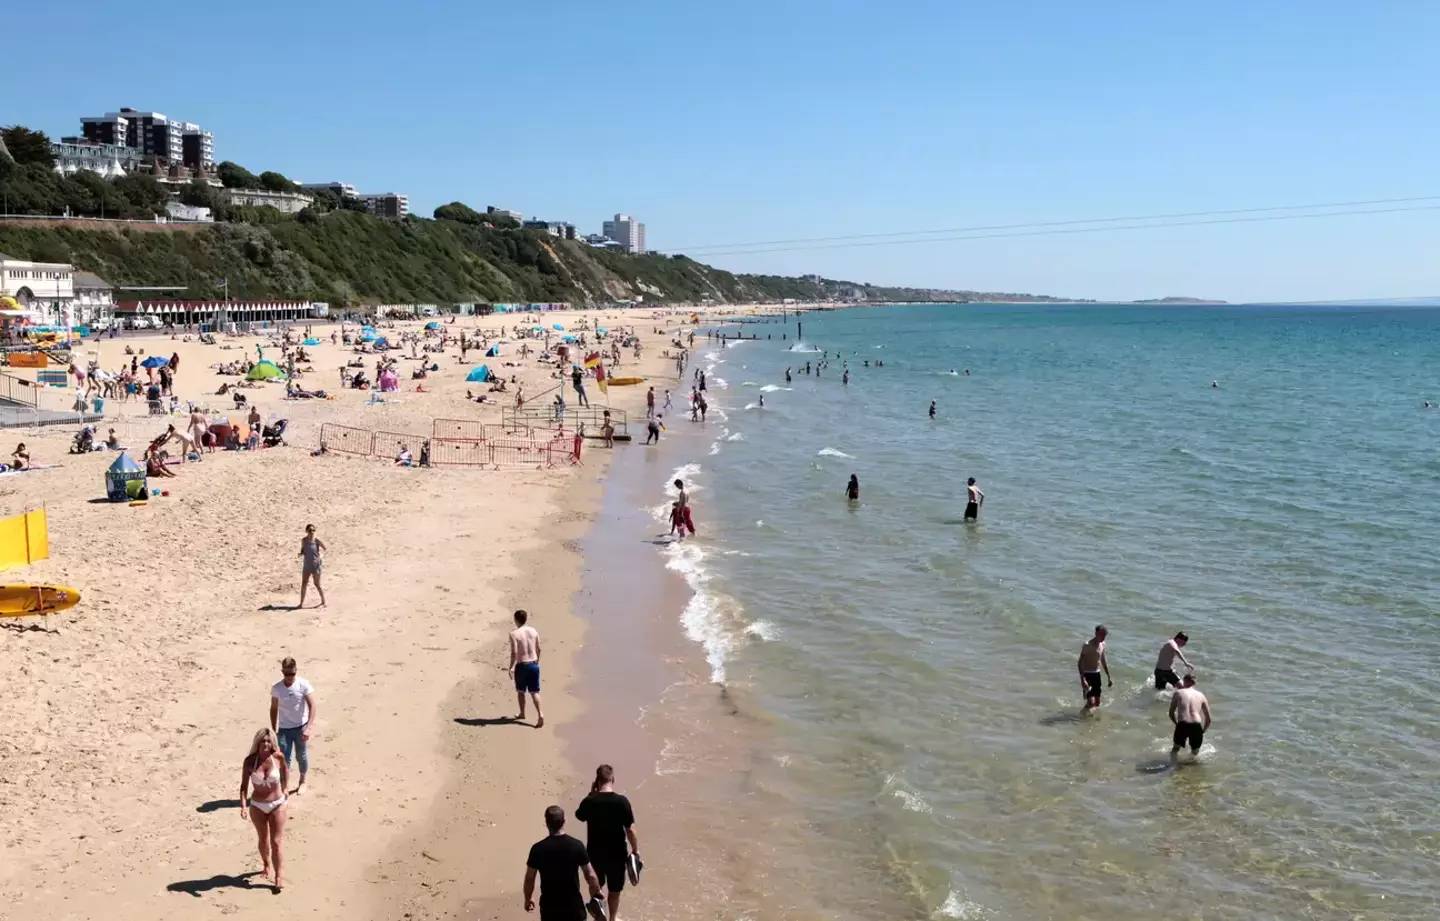 A scientist has predicted that another 40°C heatwave could fry the UK in early August.